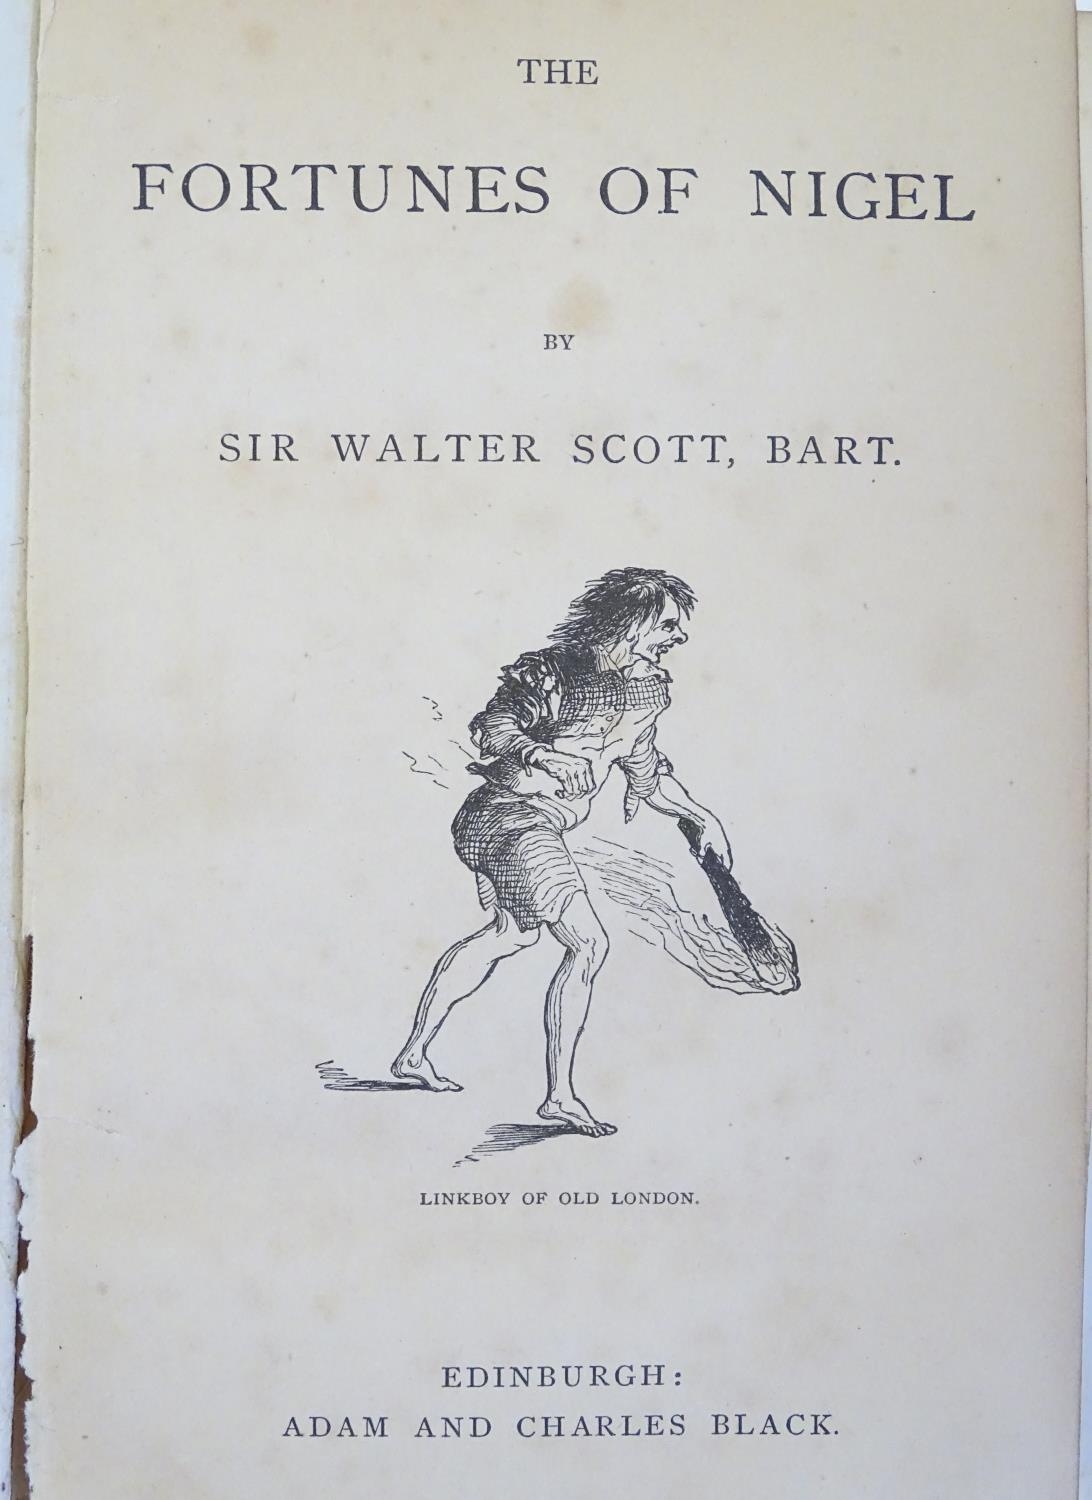 Book: The Fortunes of Nigel, by Walter Scott. Published by Adam and Charles Black, Edinburgh, 1863 - Image 4 of 15